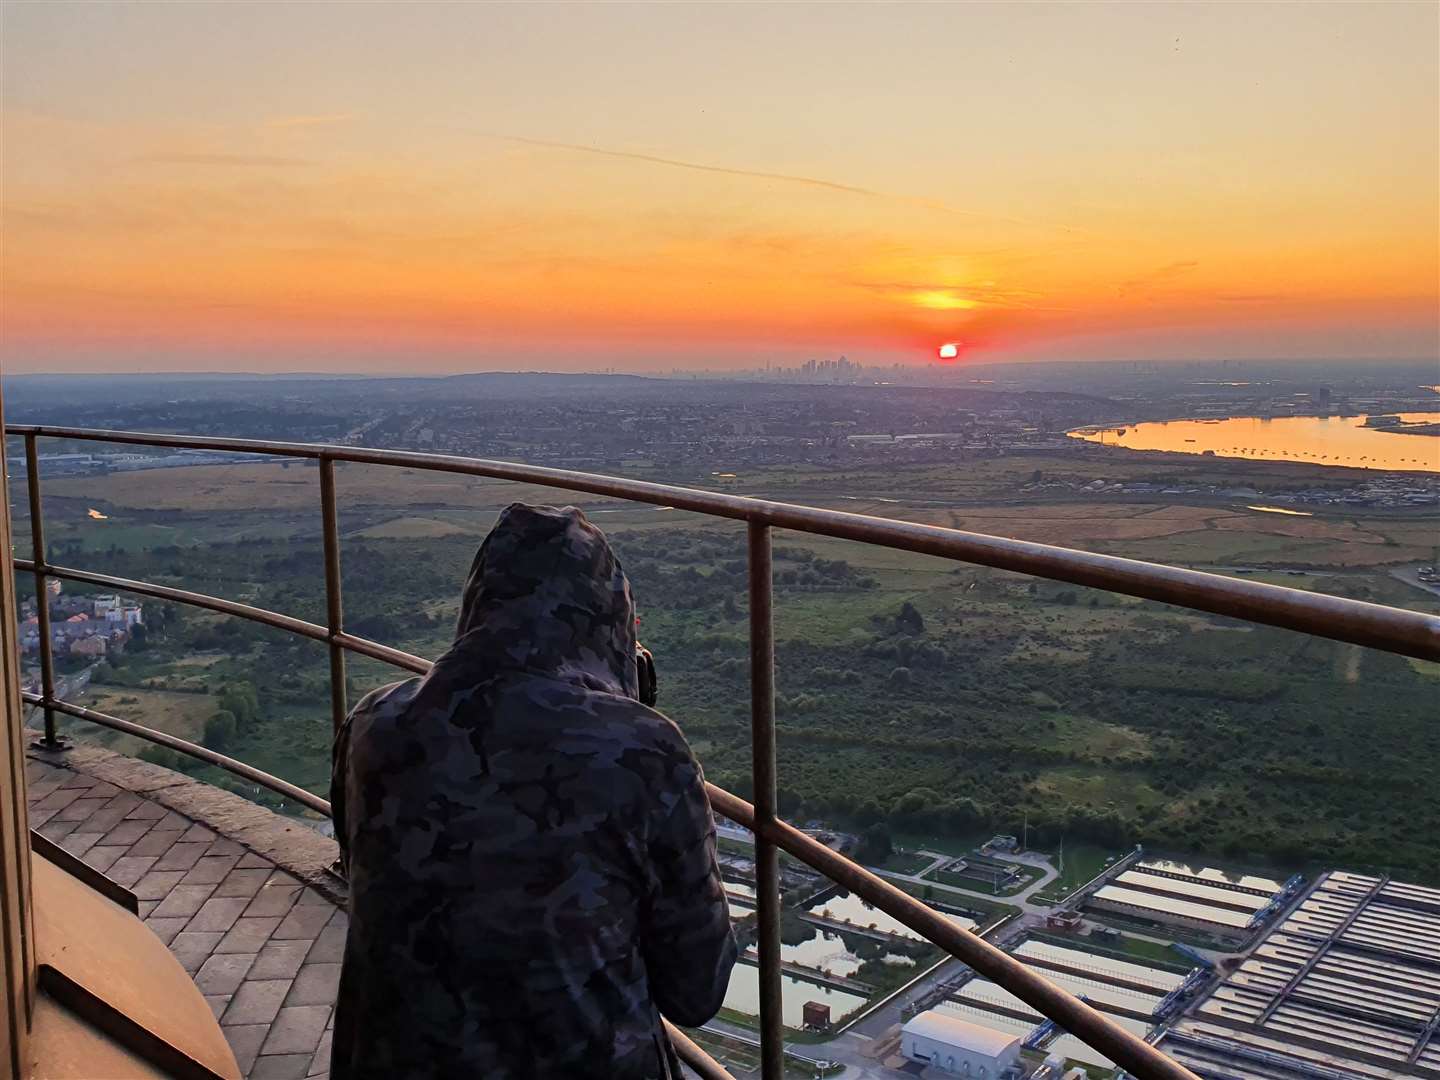 The climbers said the view got better when sunset began. Picture: UrbeXUntold